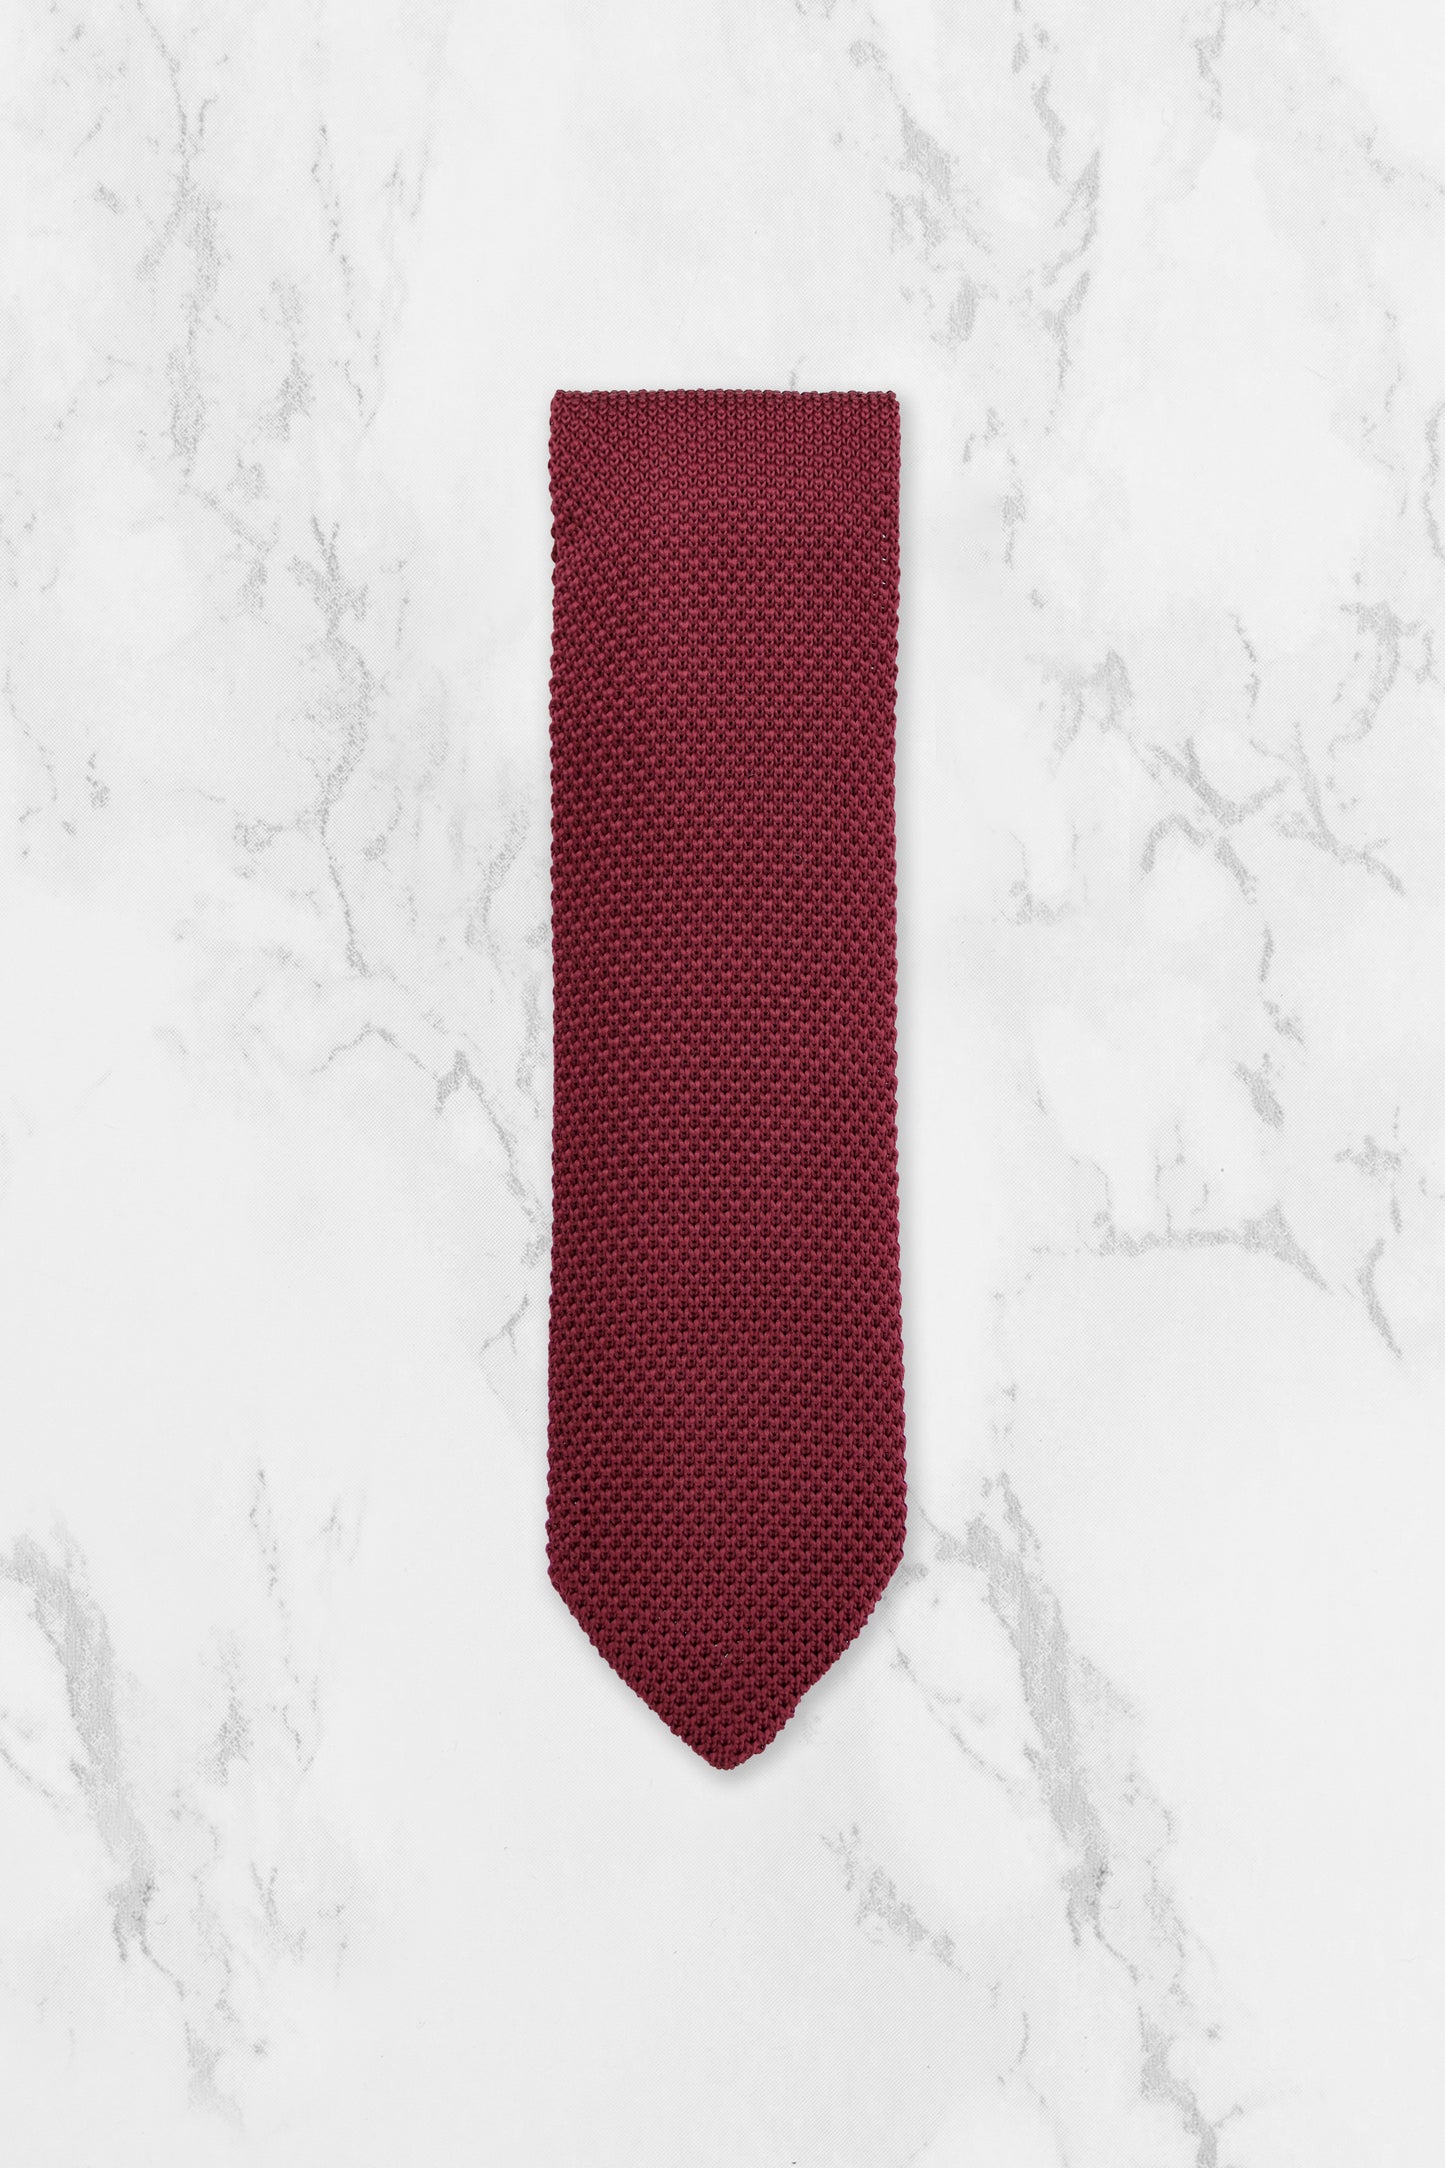 100% Polyester Diamond End Knitted Tie - Burgundy Red